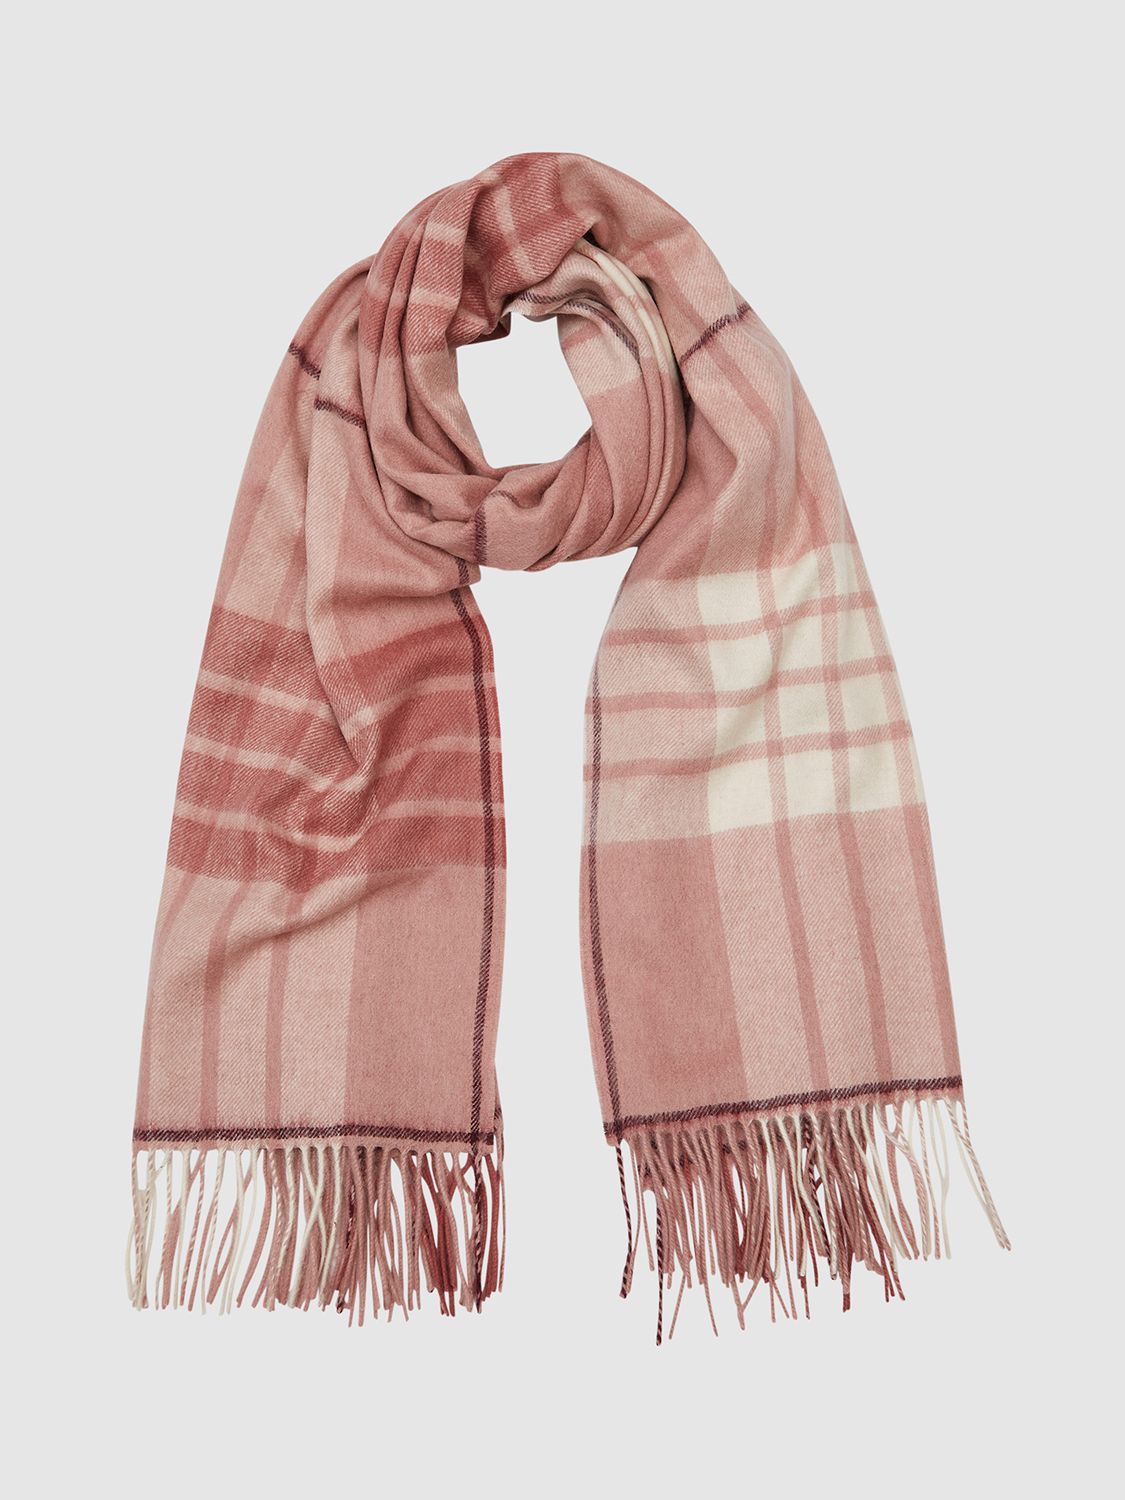 Reiss Austral Wool and Cashmere Check Scarf, Dusty Rose